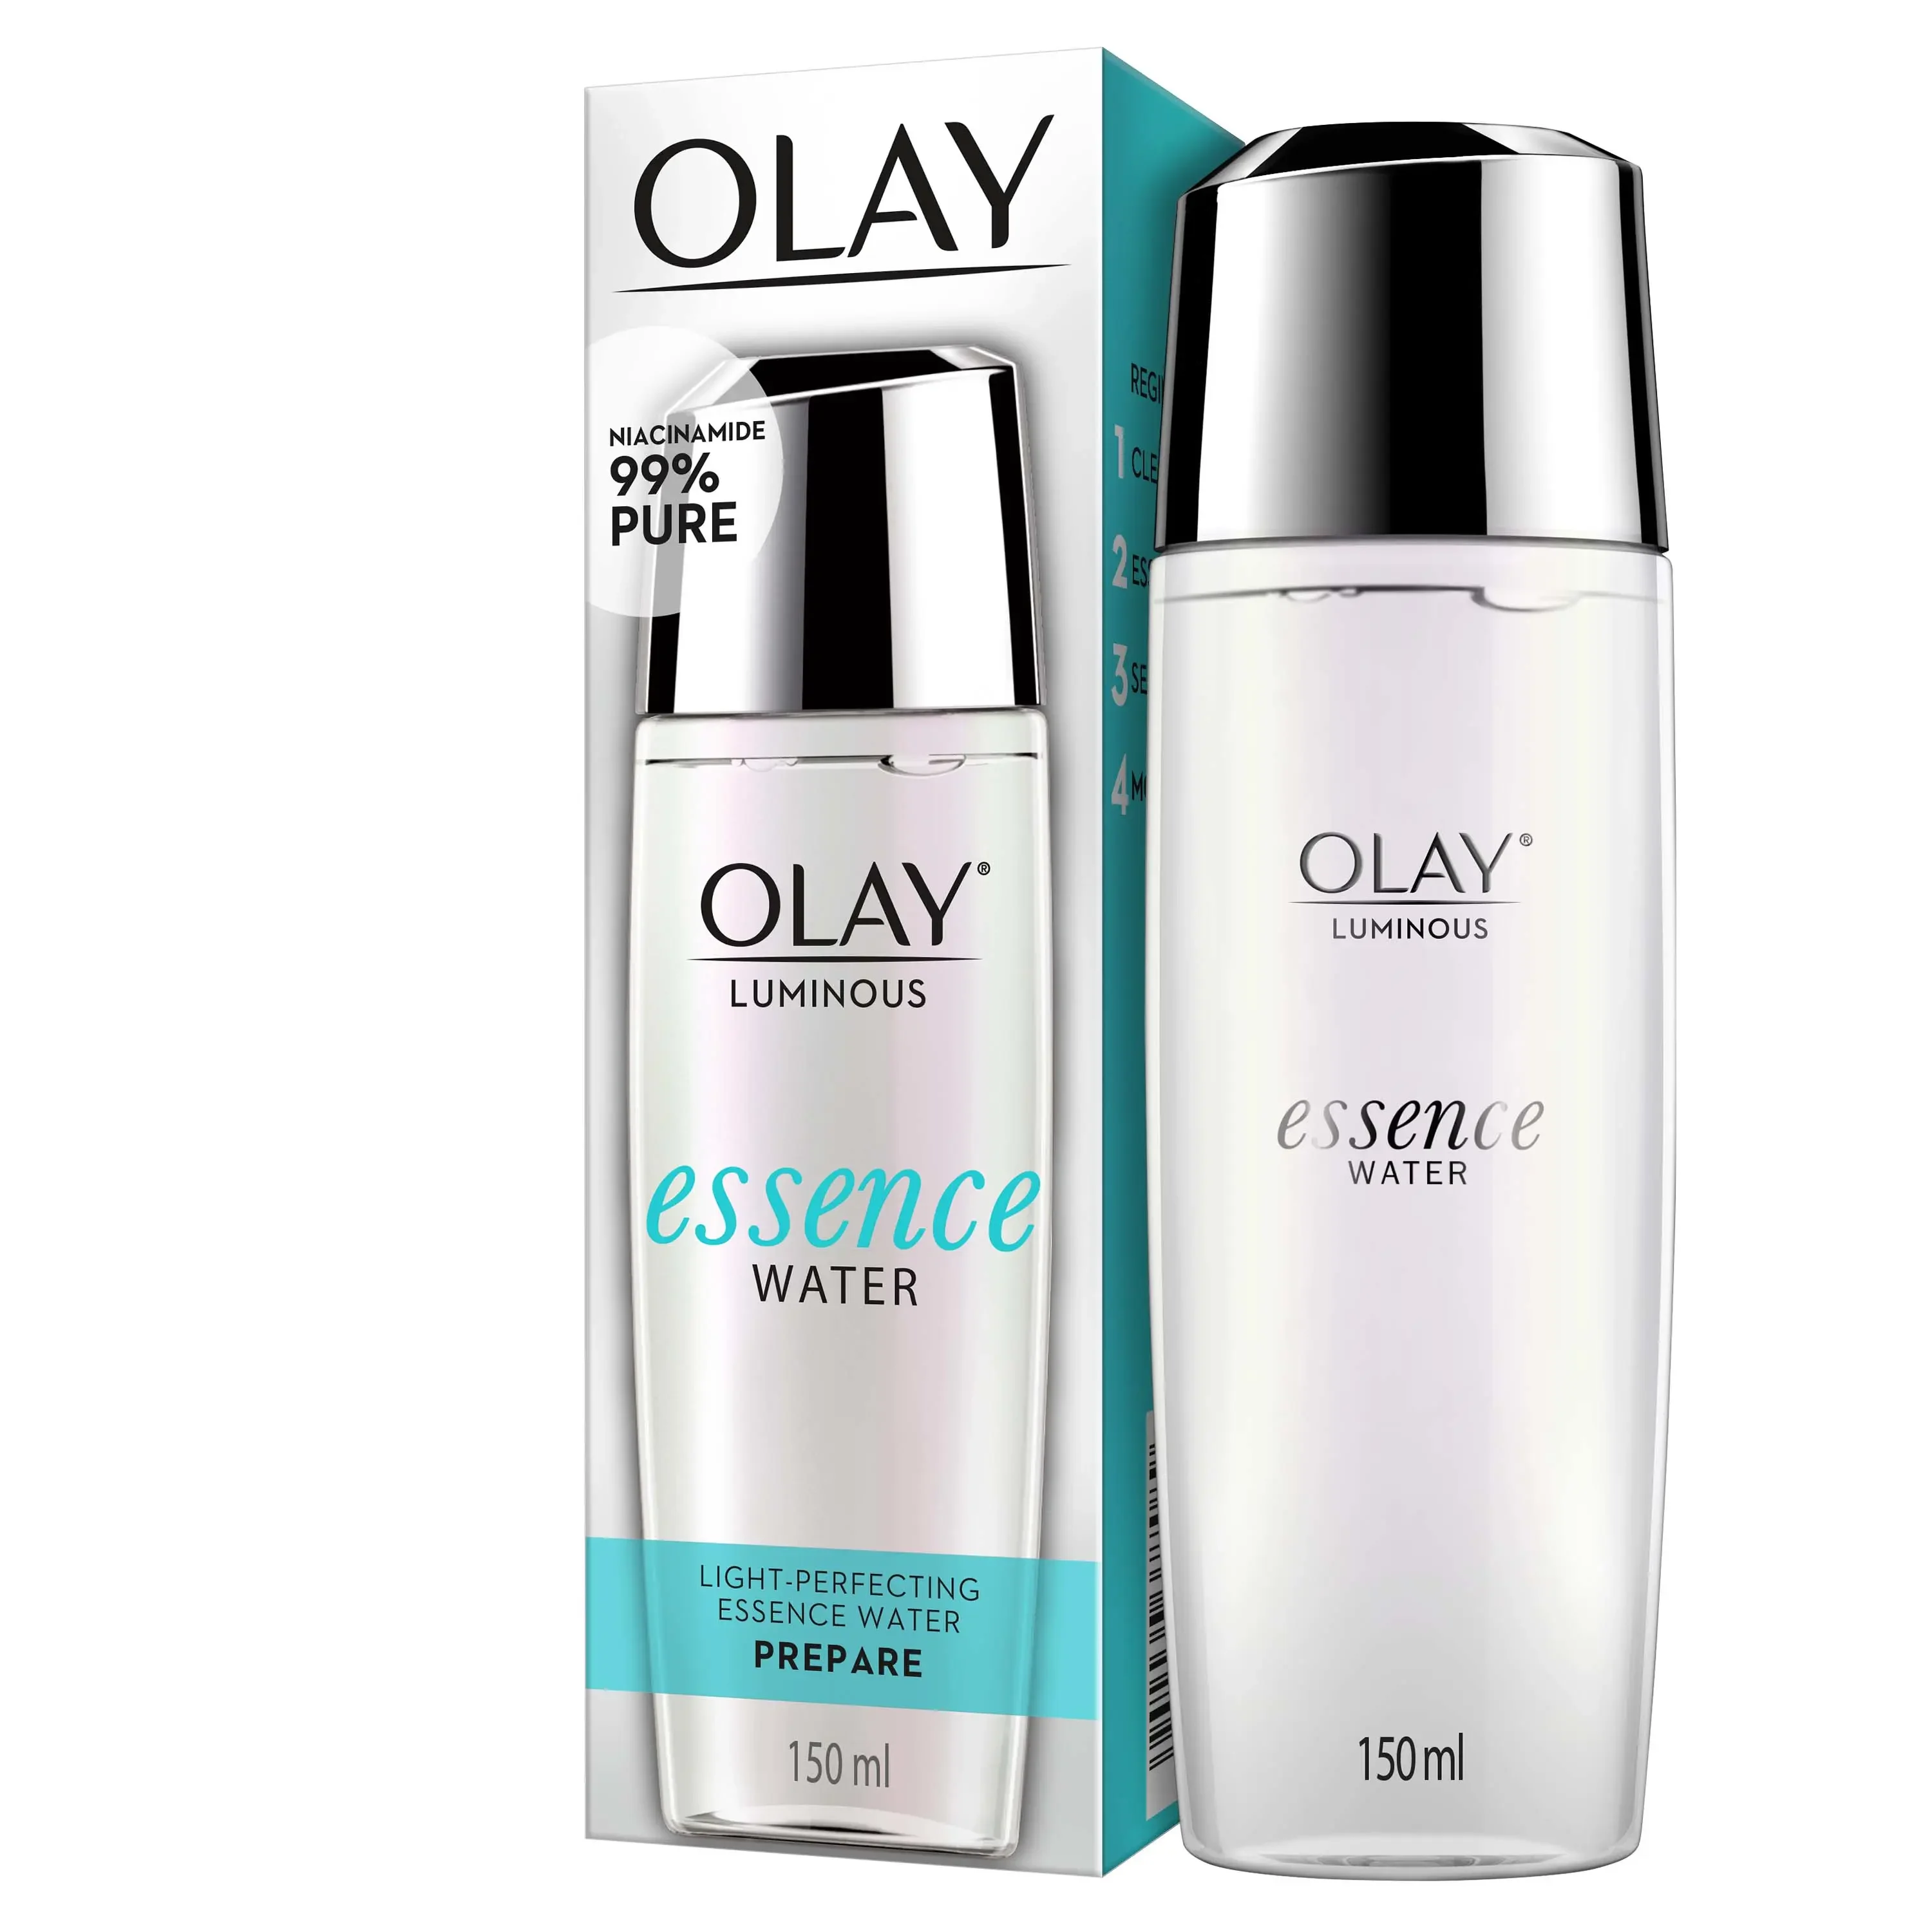 Olay Luminous Cellucent Essence Water